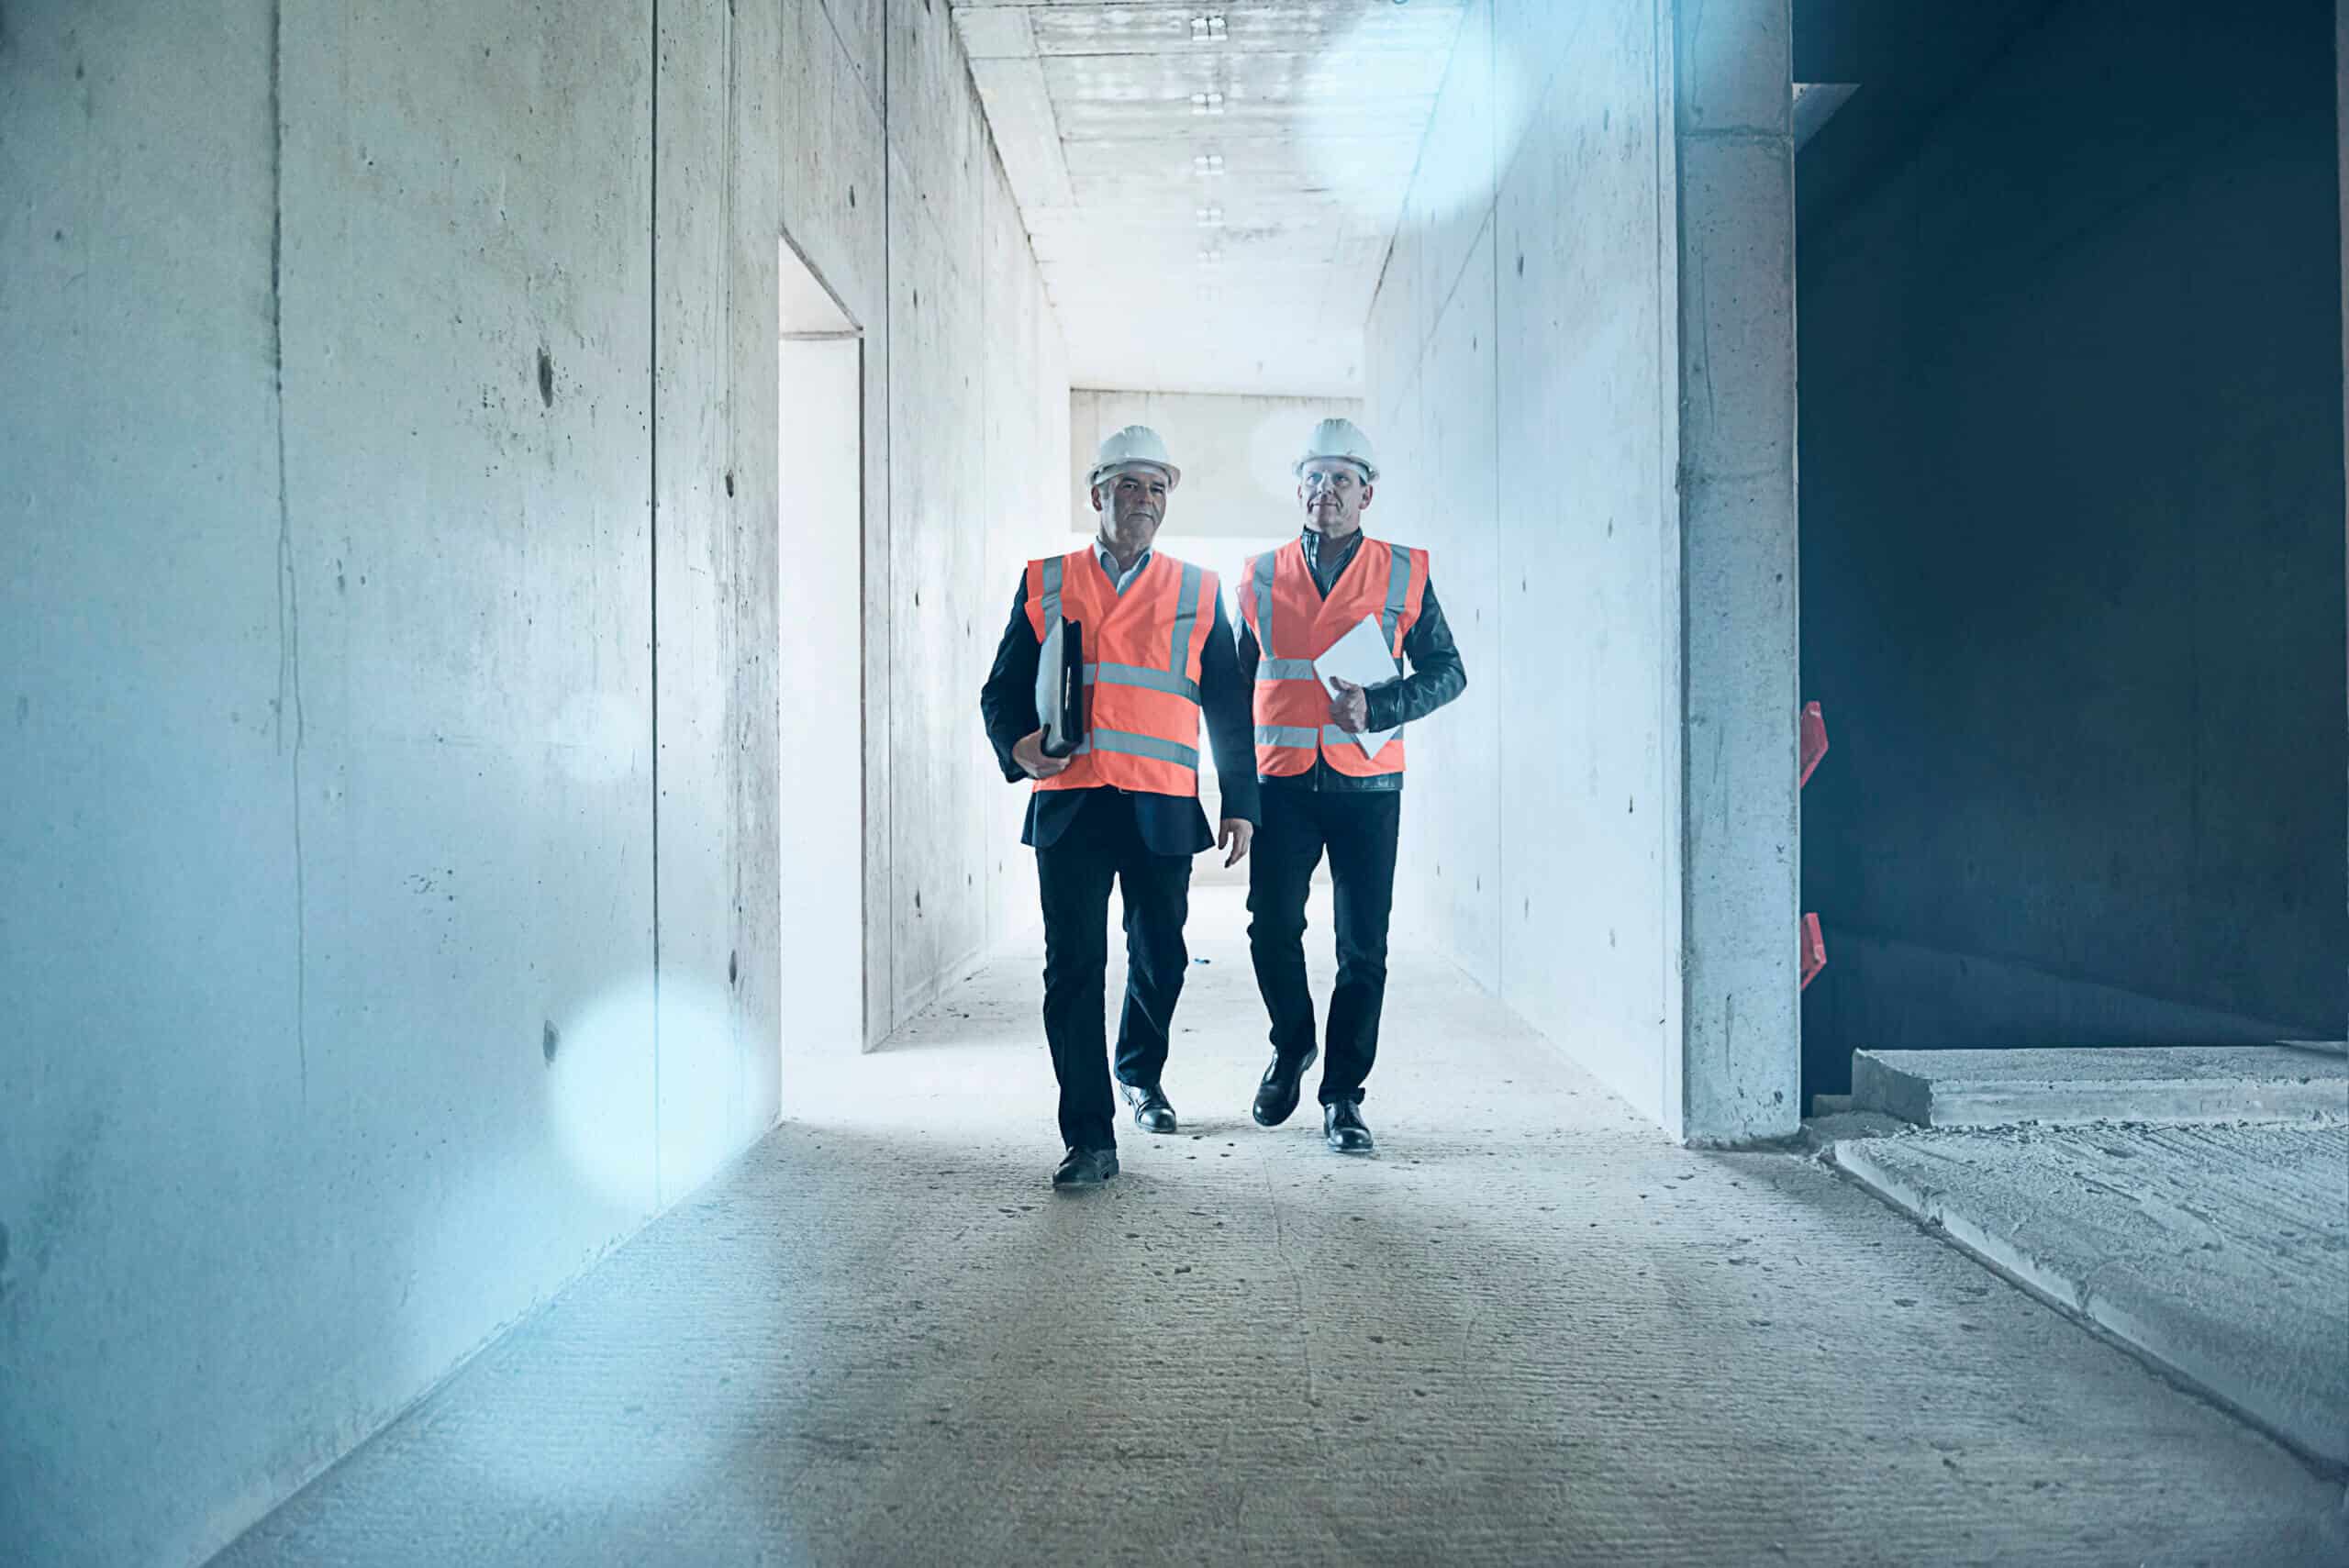 Two men wearing safety walking in building under construction